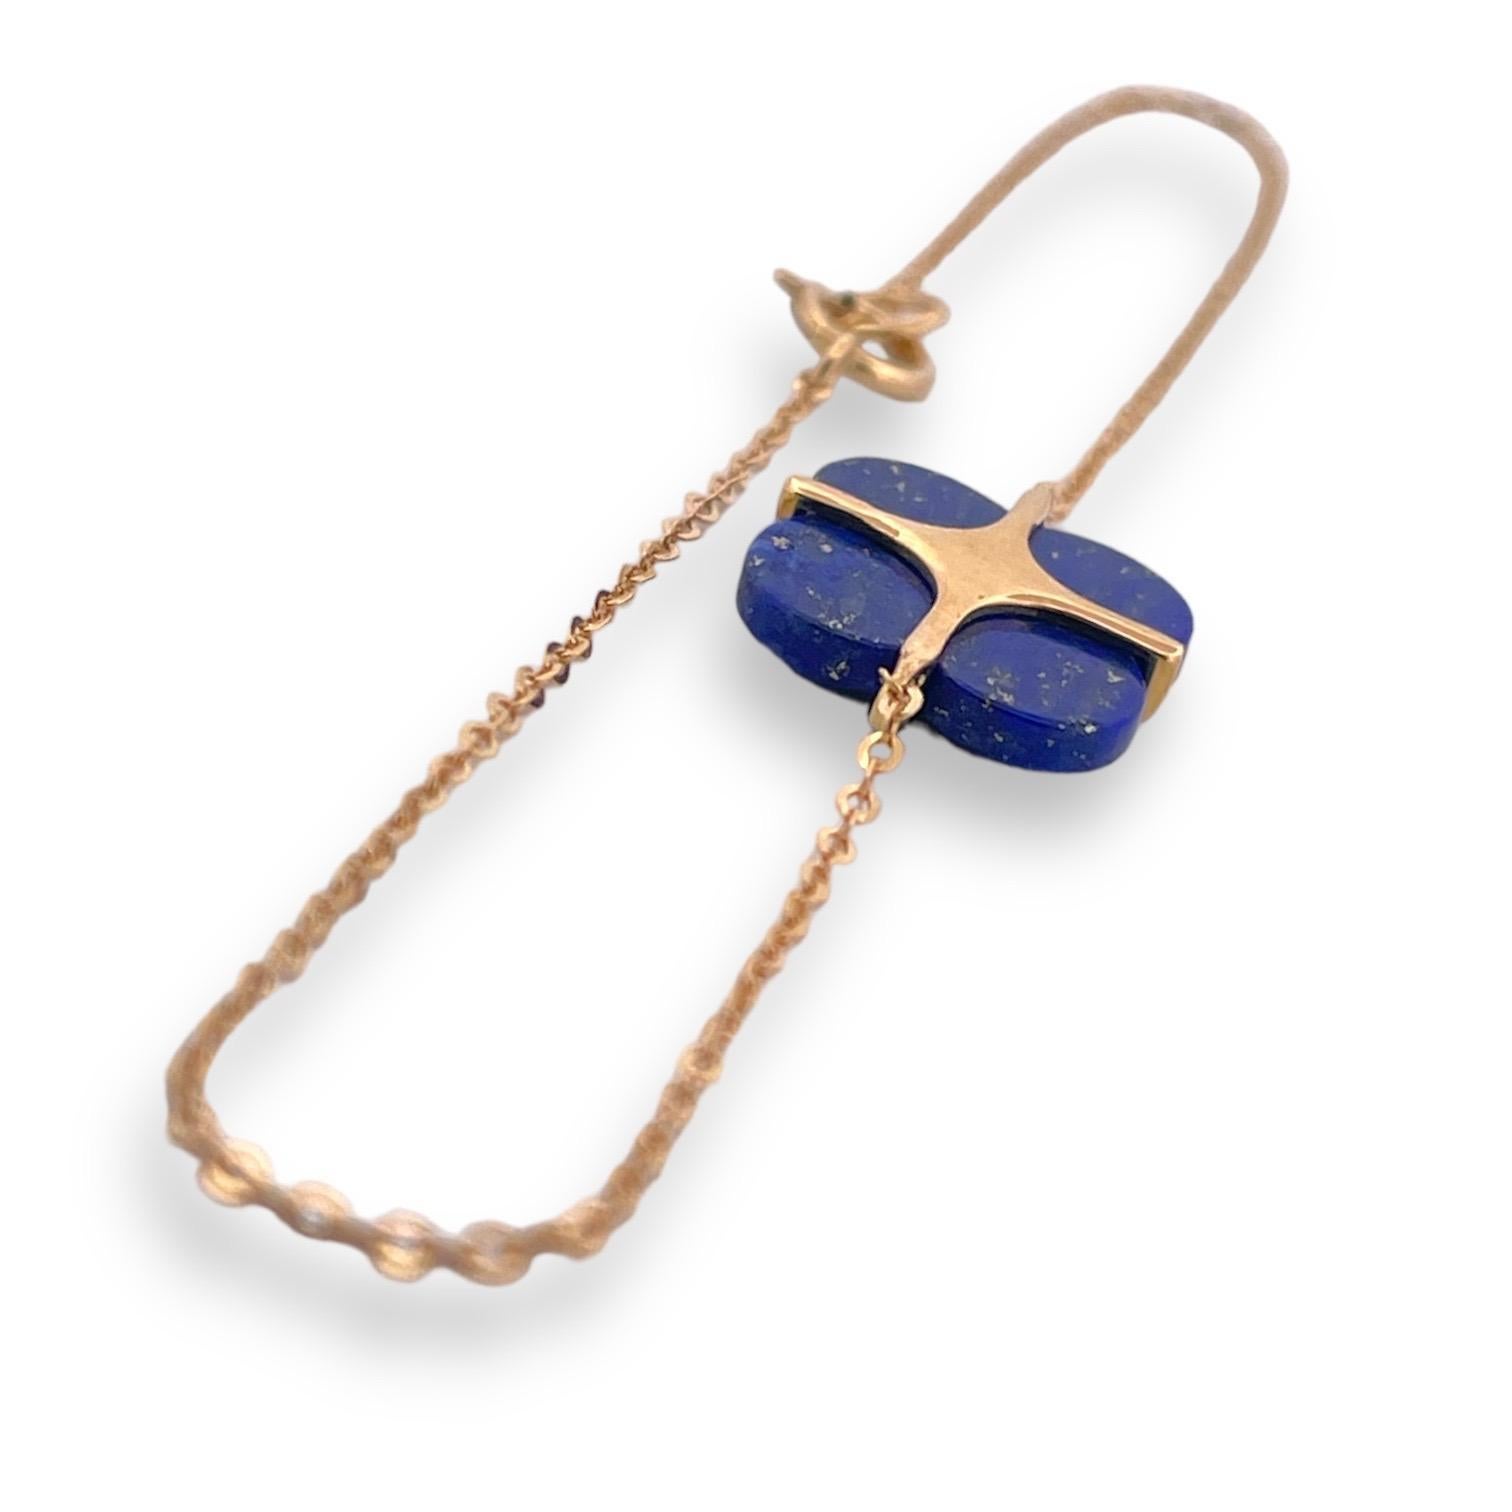 The 18K yellow gold lapis natural diamond clover bracelet is a dazzling and refined accessory that seamlessly blends classic elegance style.
Crafted from solid 18-karat yellow gold, the bracelet features a series of clover motifs, each adorned with